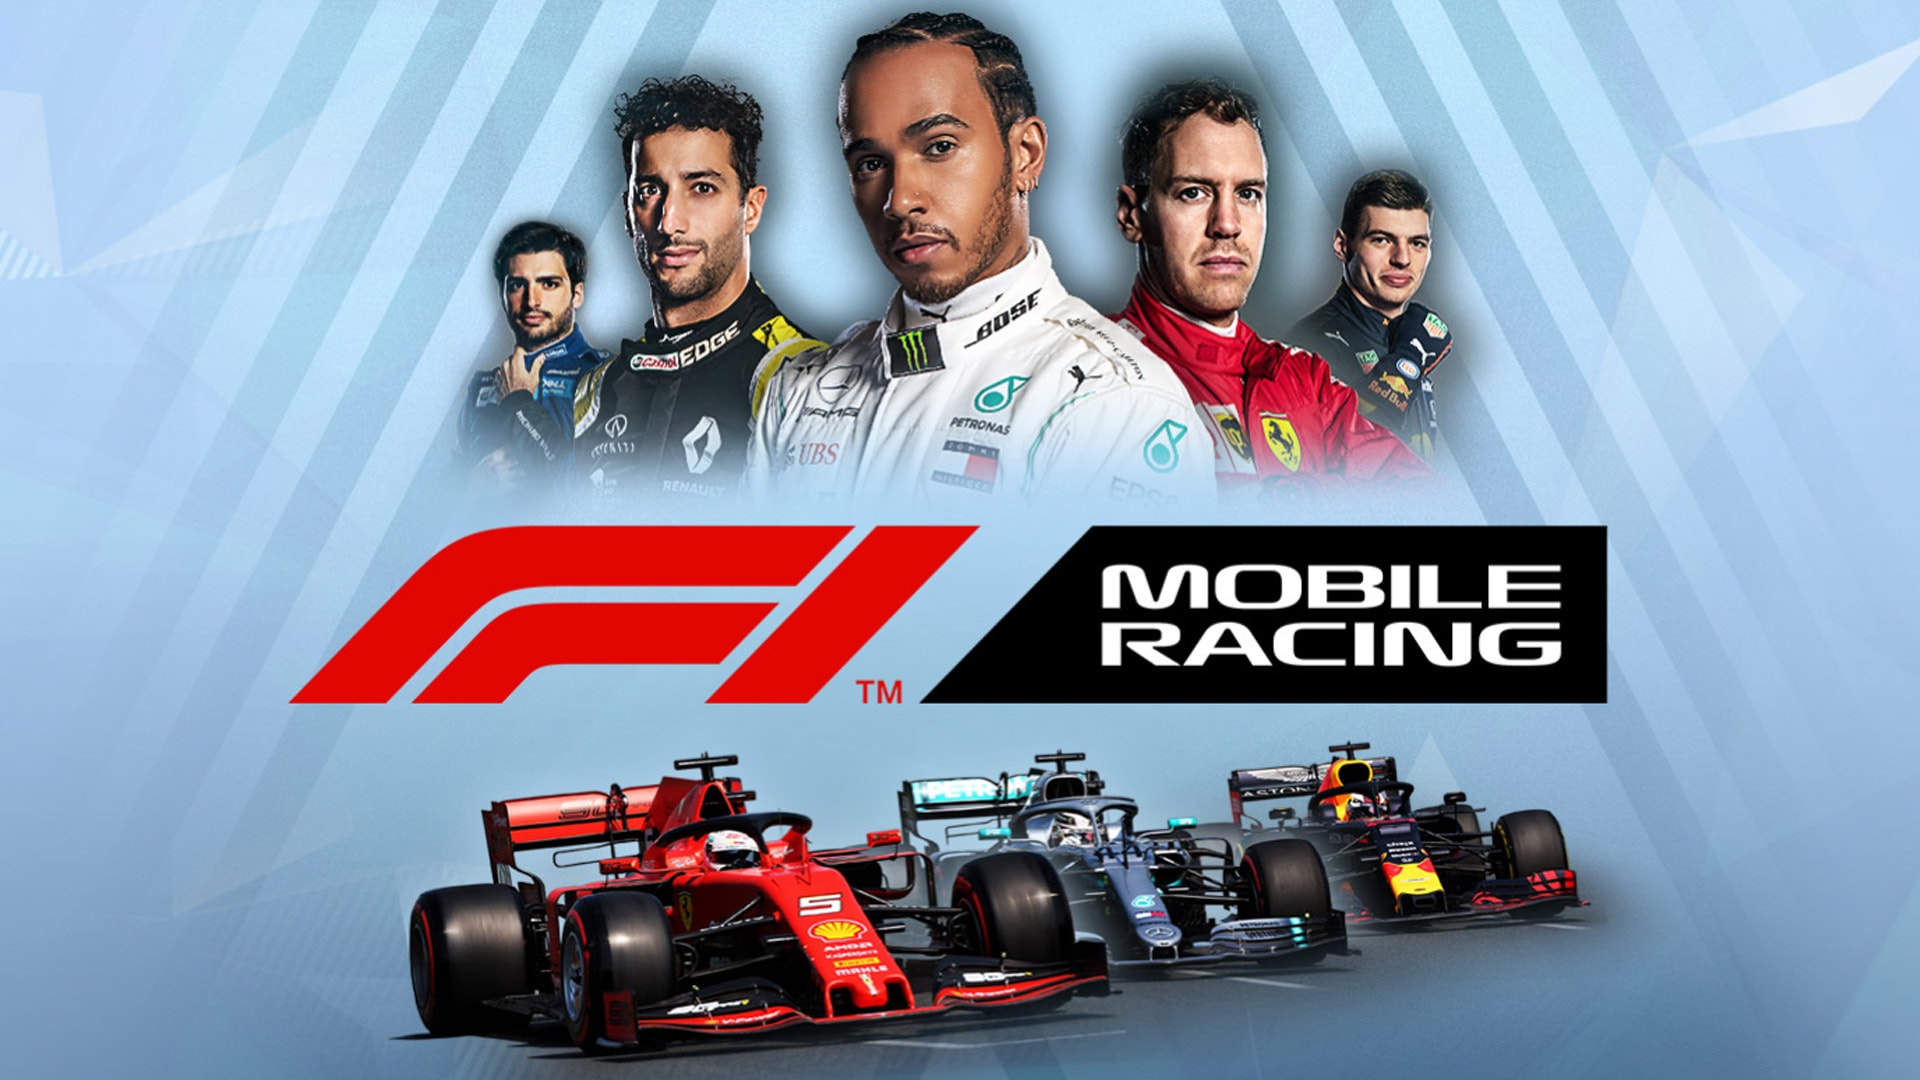 F1 Mobile Racing Update Brings the Official 2022 Driver LineUp, Tons